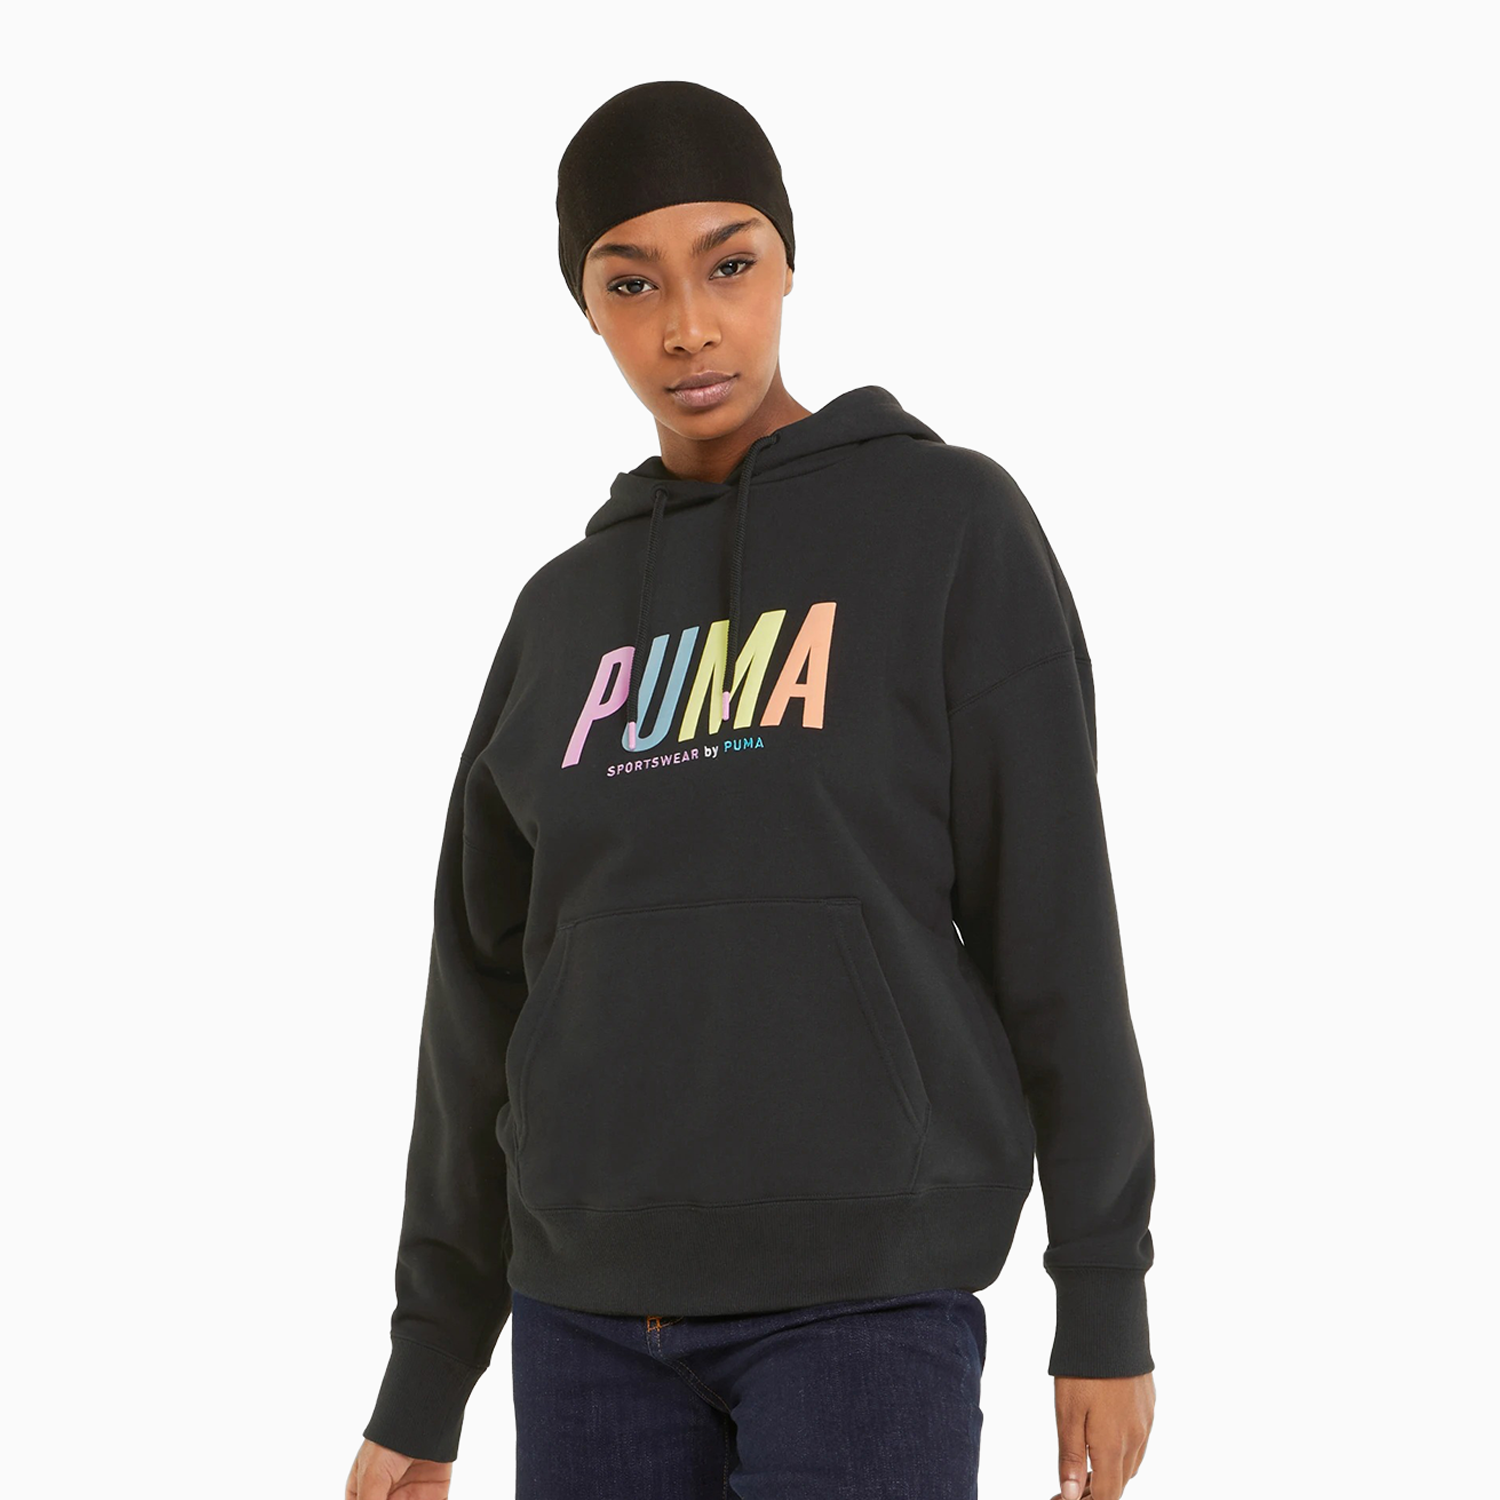 Puma Women's Sportswear Graphic Outfit - Color: Puma Black - Tops and Bottoms USA -